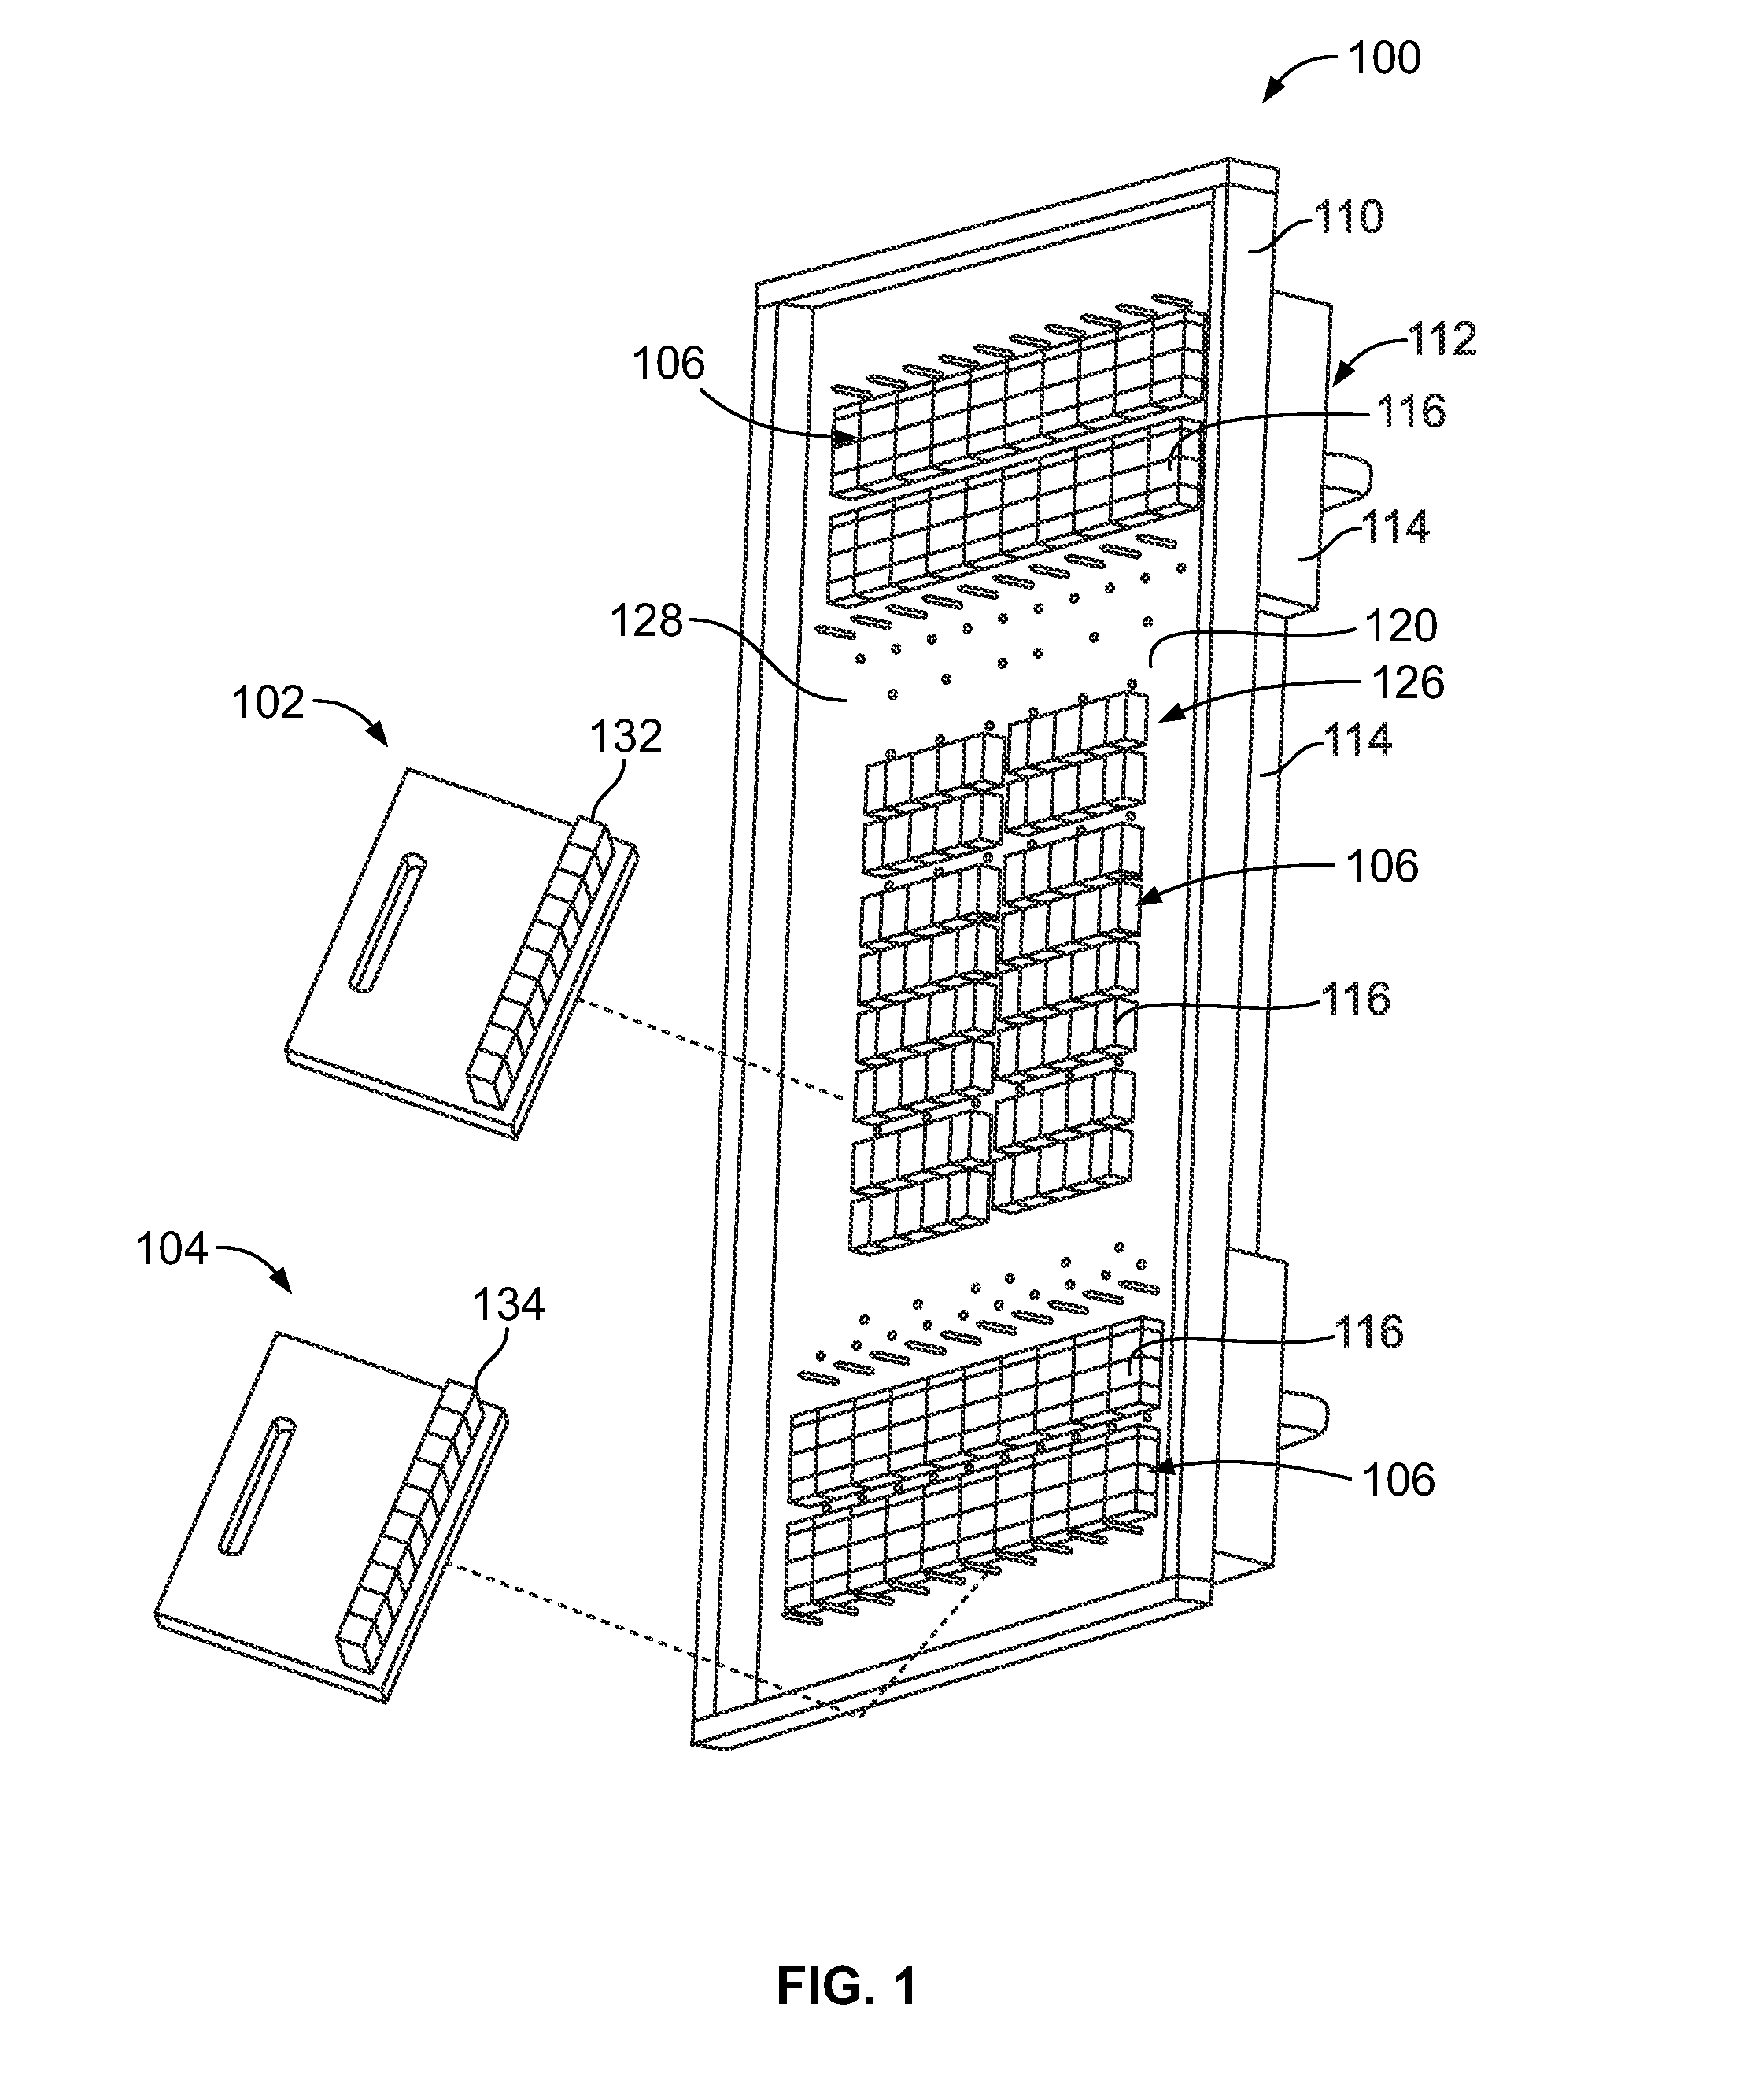 Cable backplane system having a strain relief component